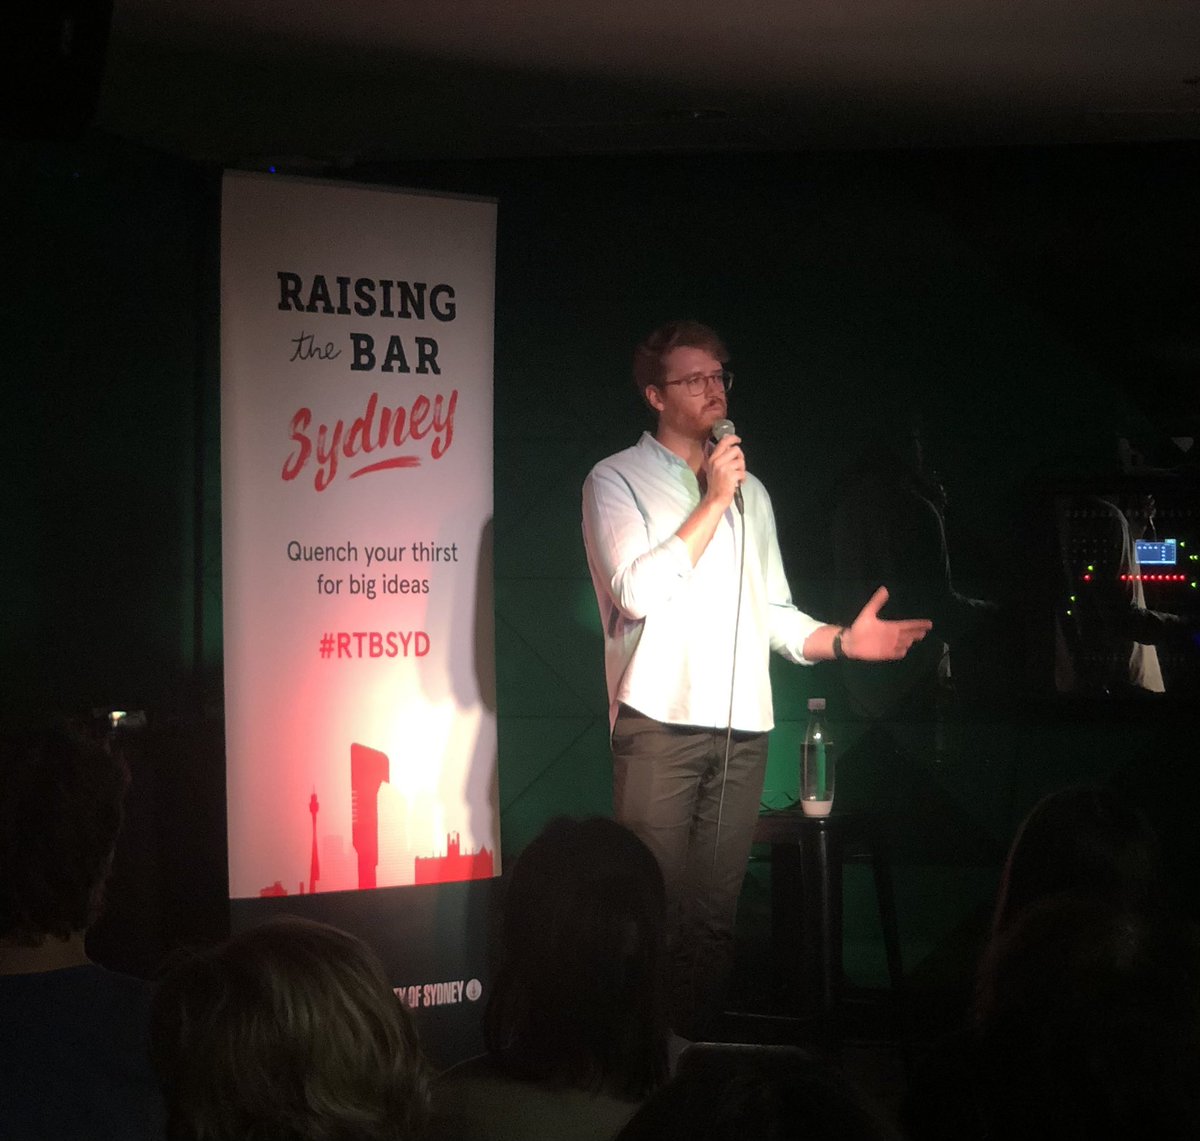 Great to see @JacobJCrouse at Raising the Bar Sydney #RTBSYD ‘I called up the prime minister to fix the clocks’ 😂 Jacob talking on how when the clocks change it can really mess with our circadian rhythms 🧠 💤